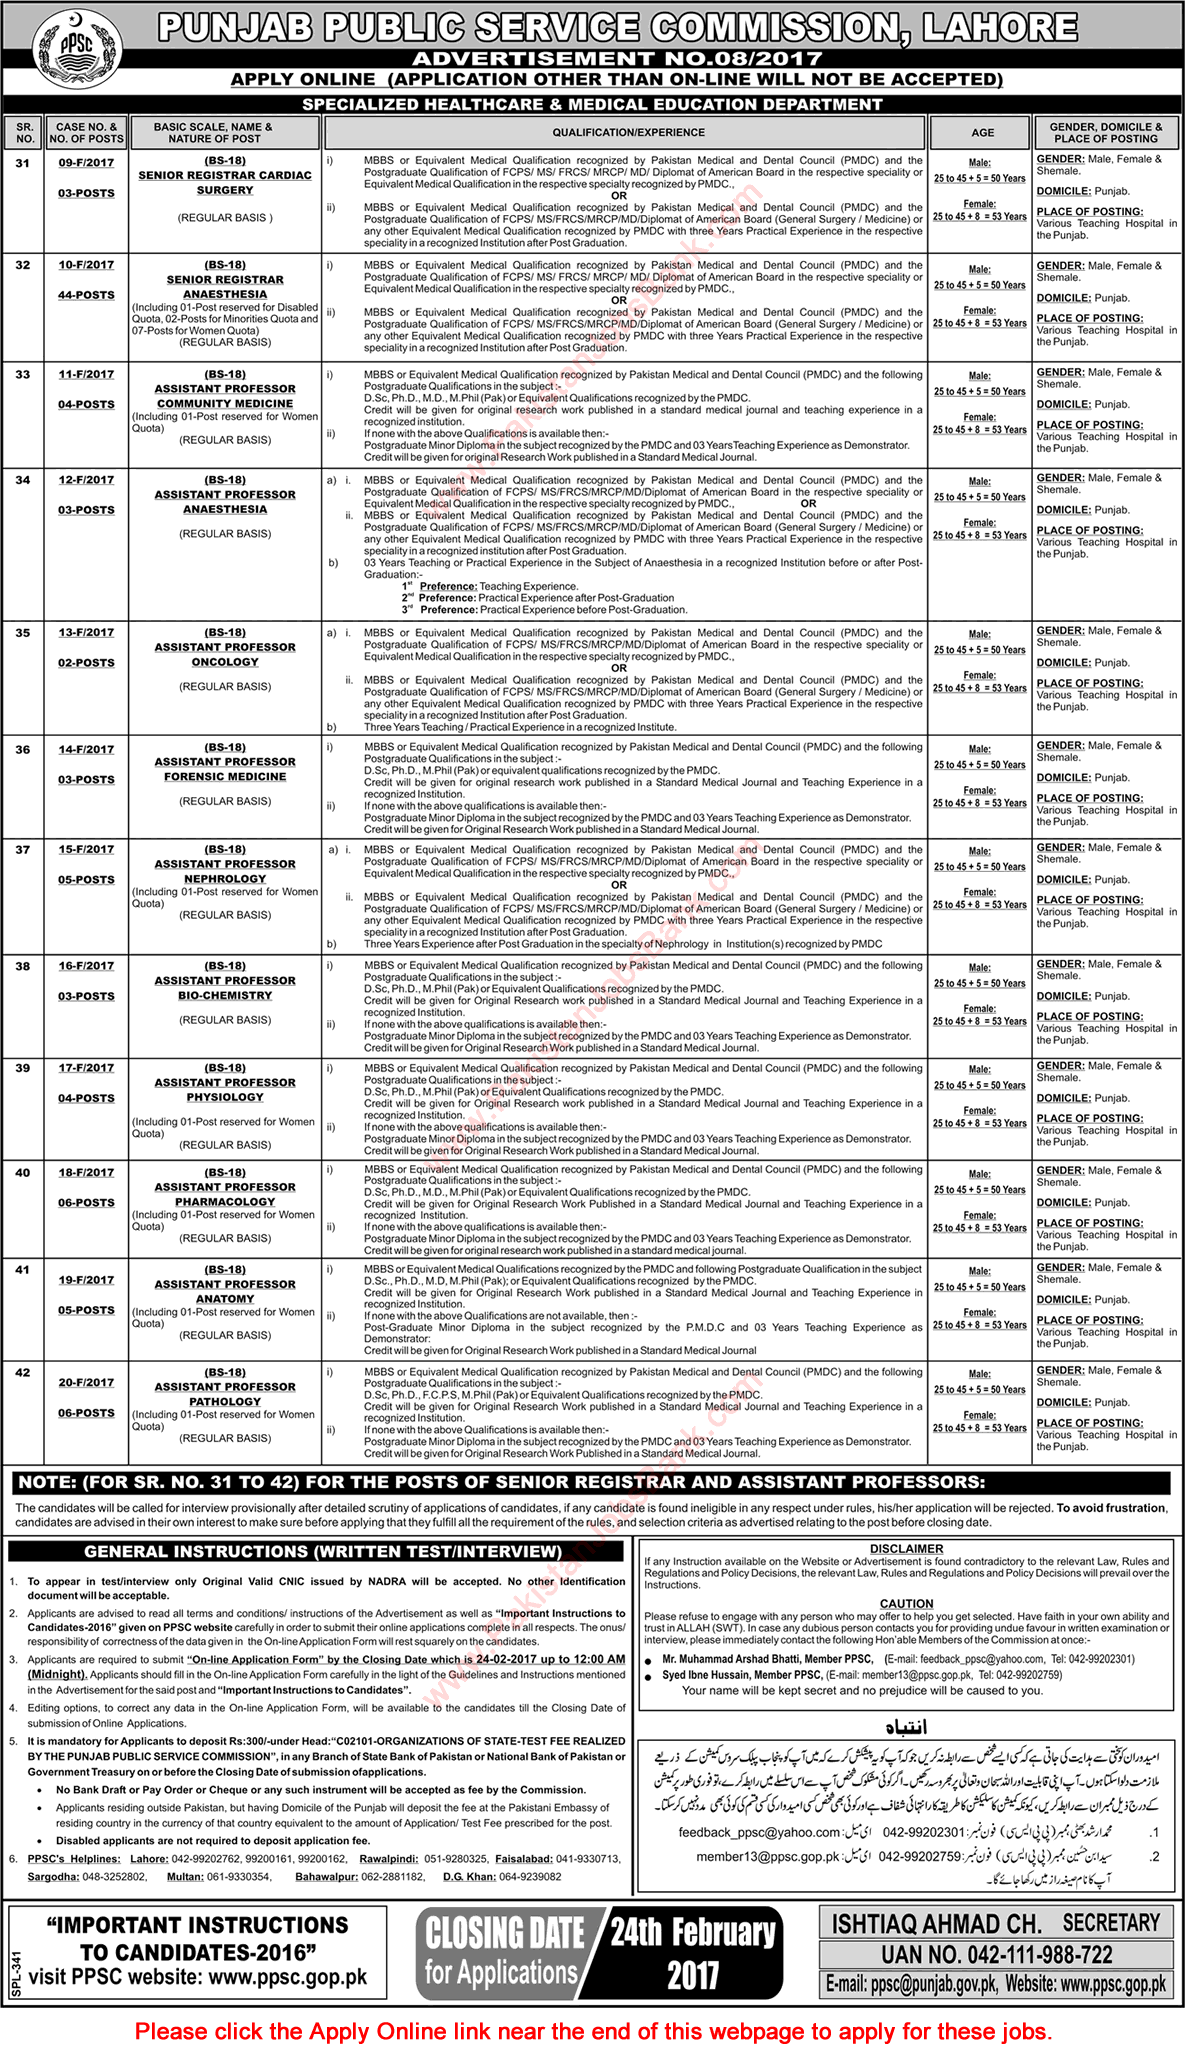 PPSC Jobs February 2017 Apply Online Consolidated Advertisement No 08/2017 Latest